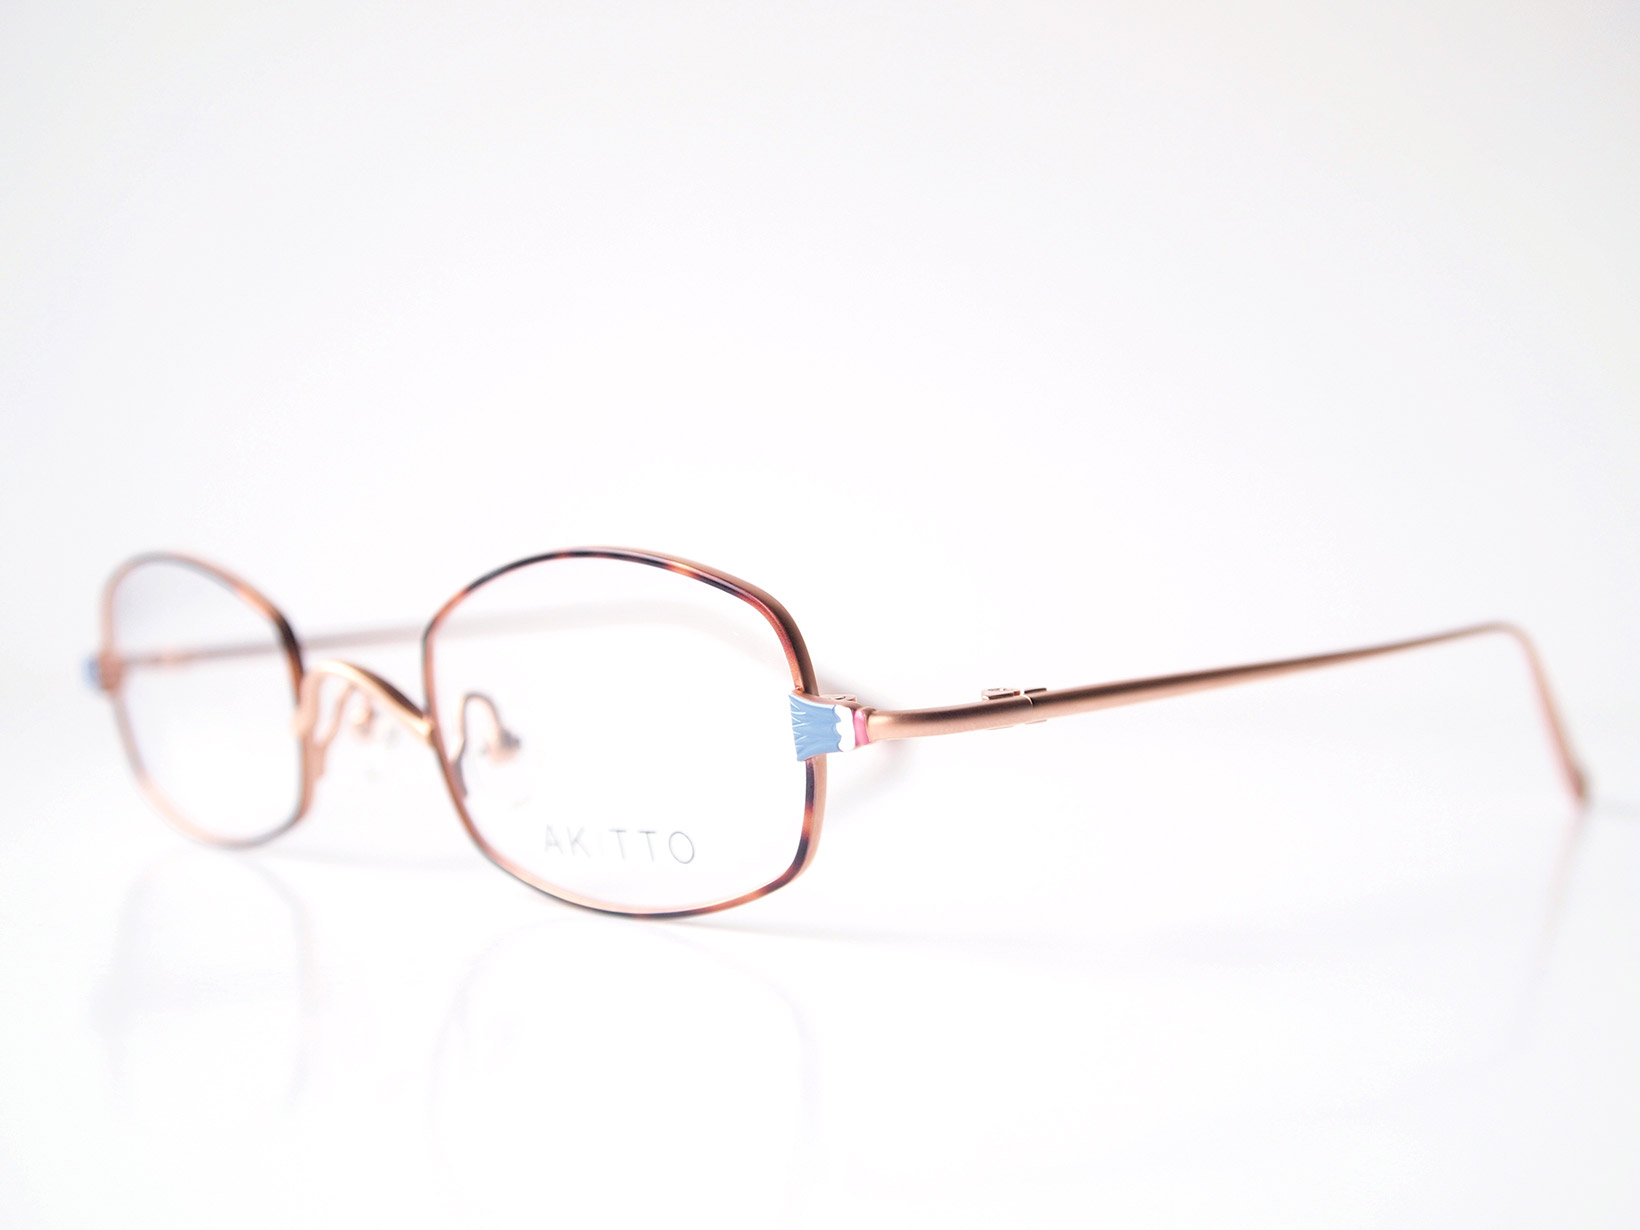 AKITTO 2017-3rd has2 color｜3 size:45□22 material:titanium price:44,500-(＋tax)